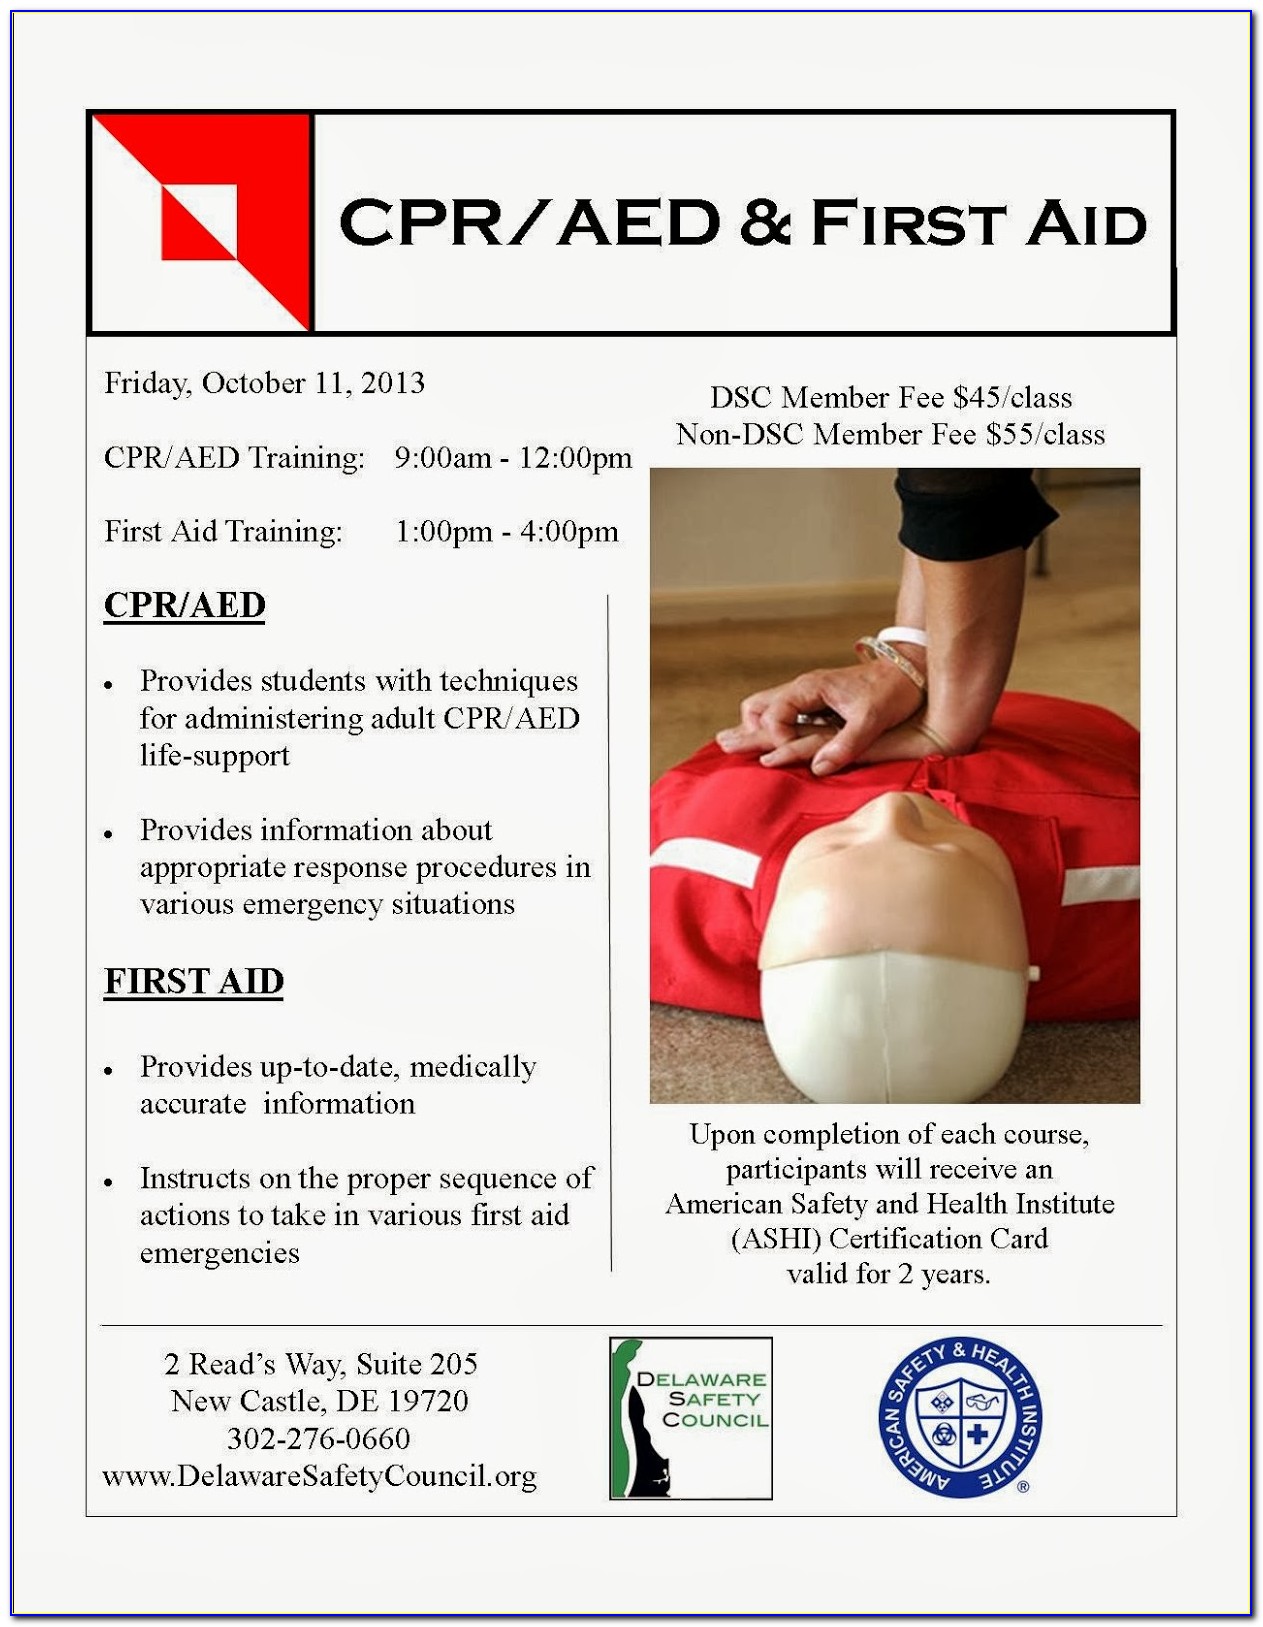 Enjoycpr (cpr & First Aid Certification) The Bronx Ny